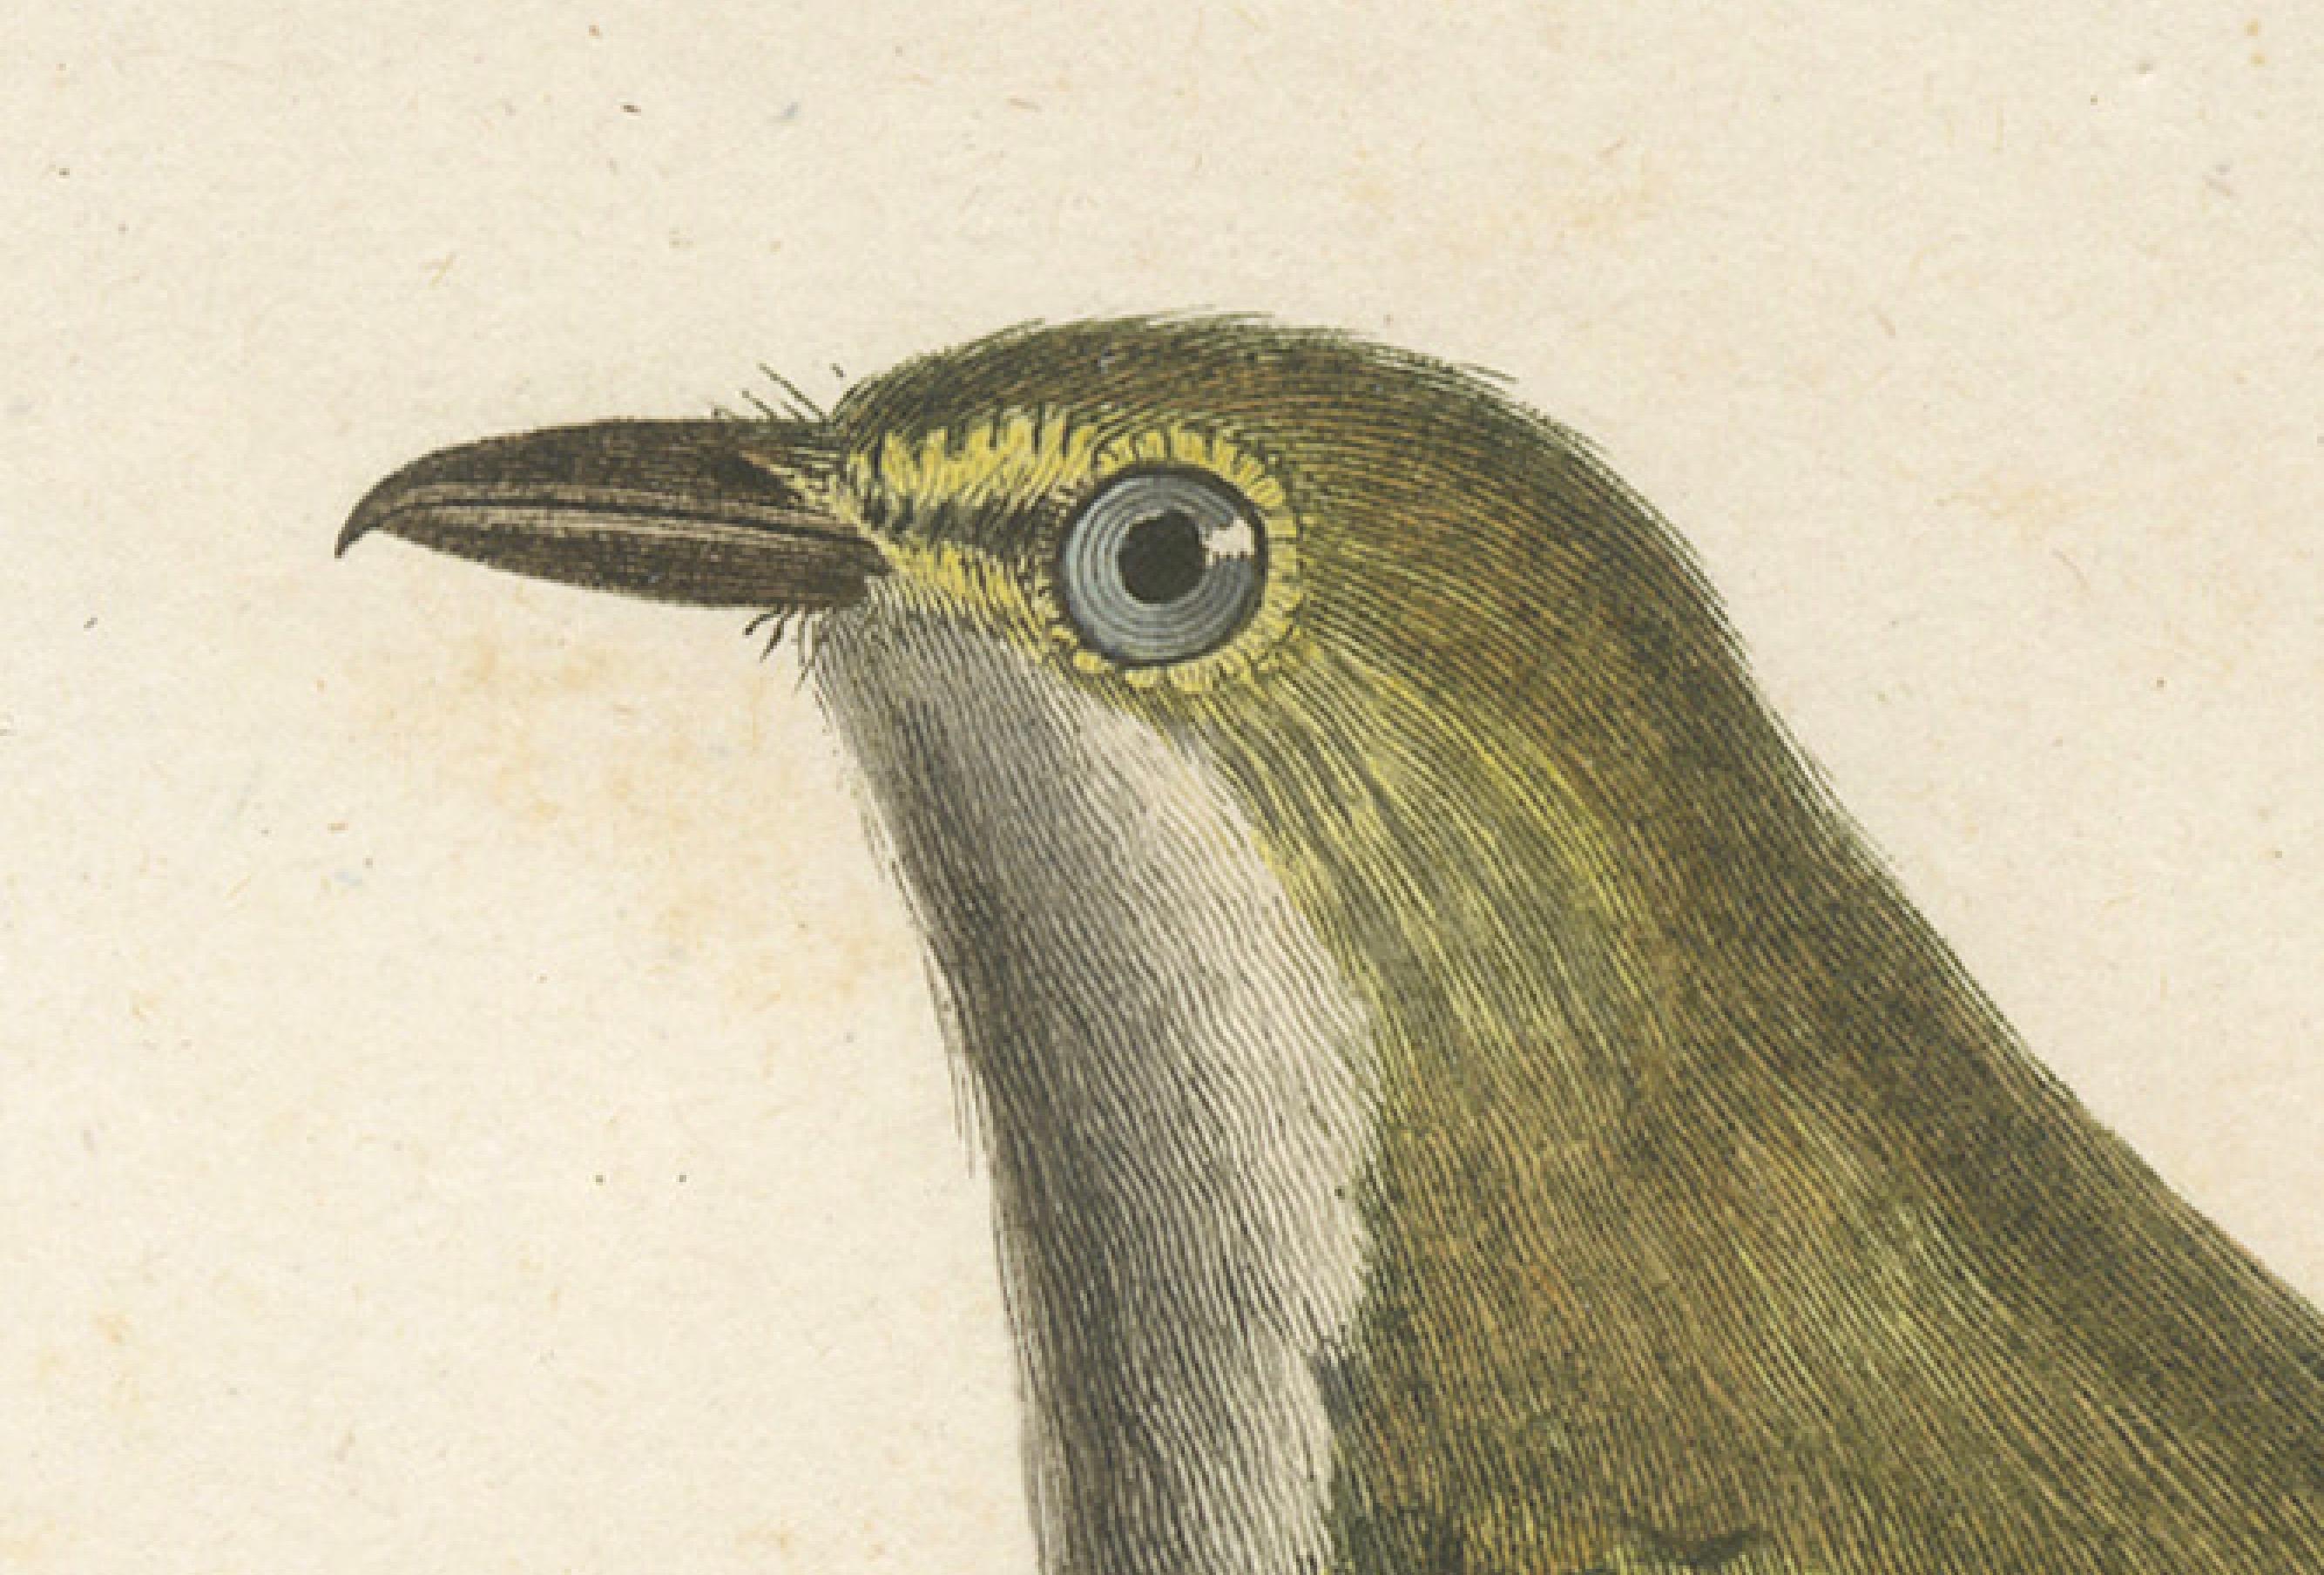 19th Century Large Antique Vireo Bird Illustration - 1807 Vieillot Handcolored Print For Sale